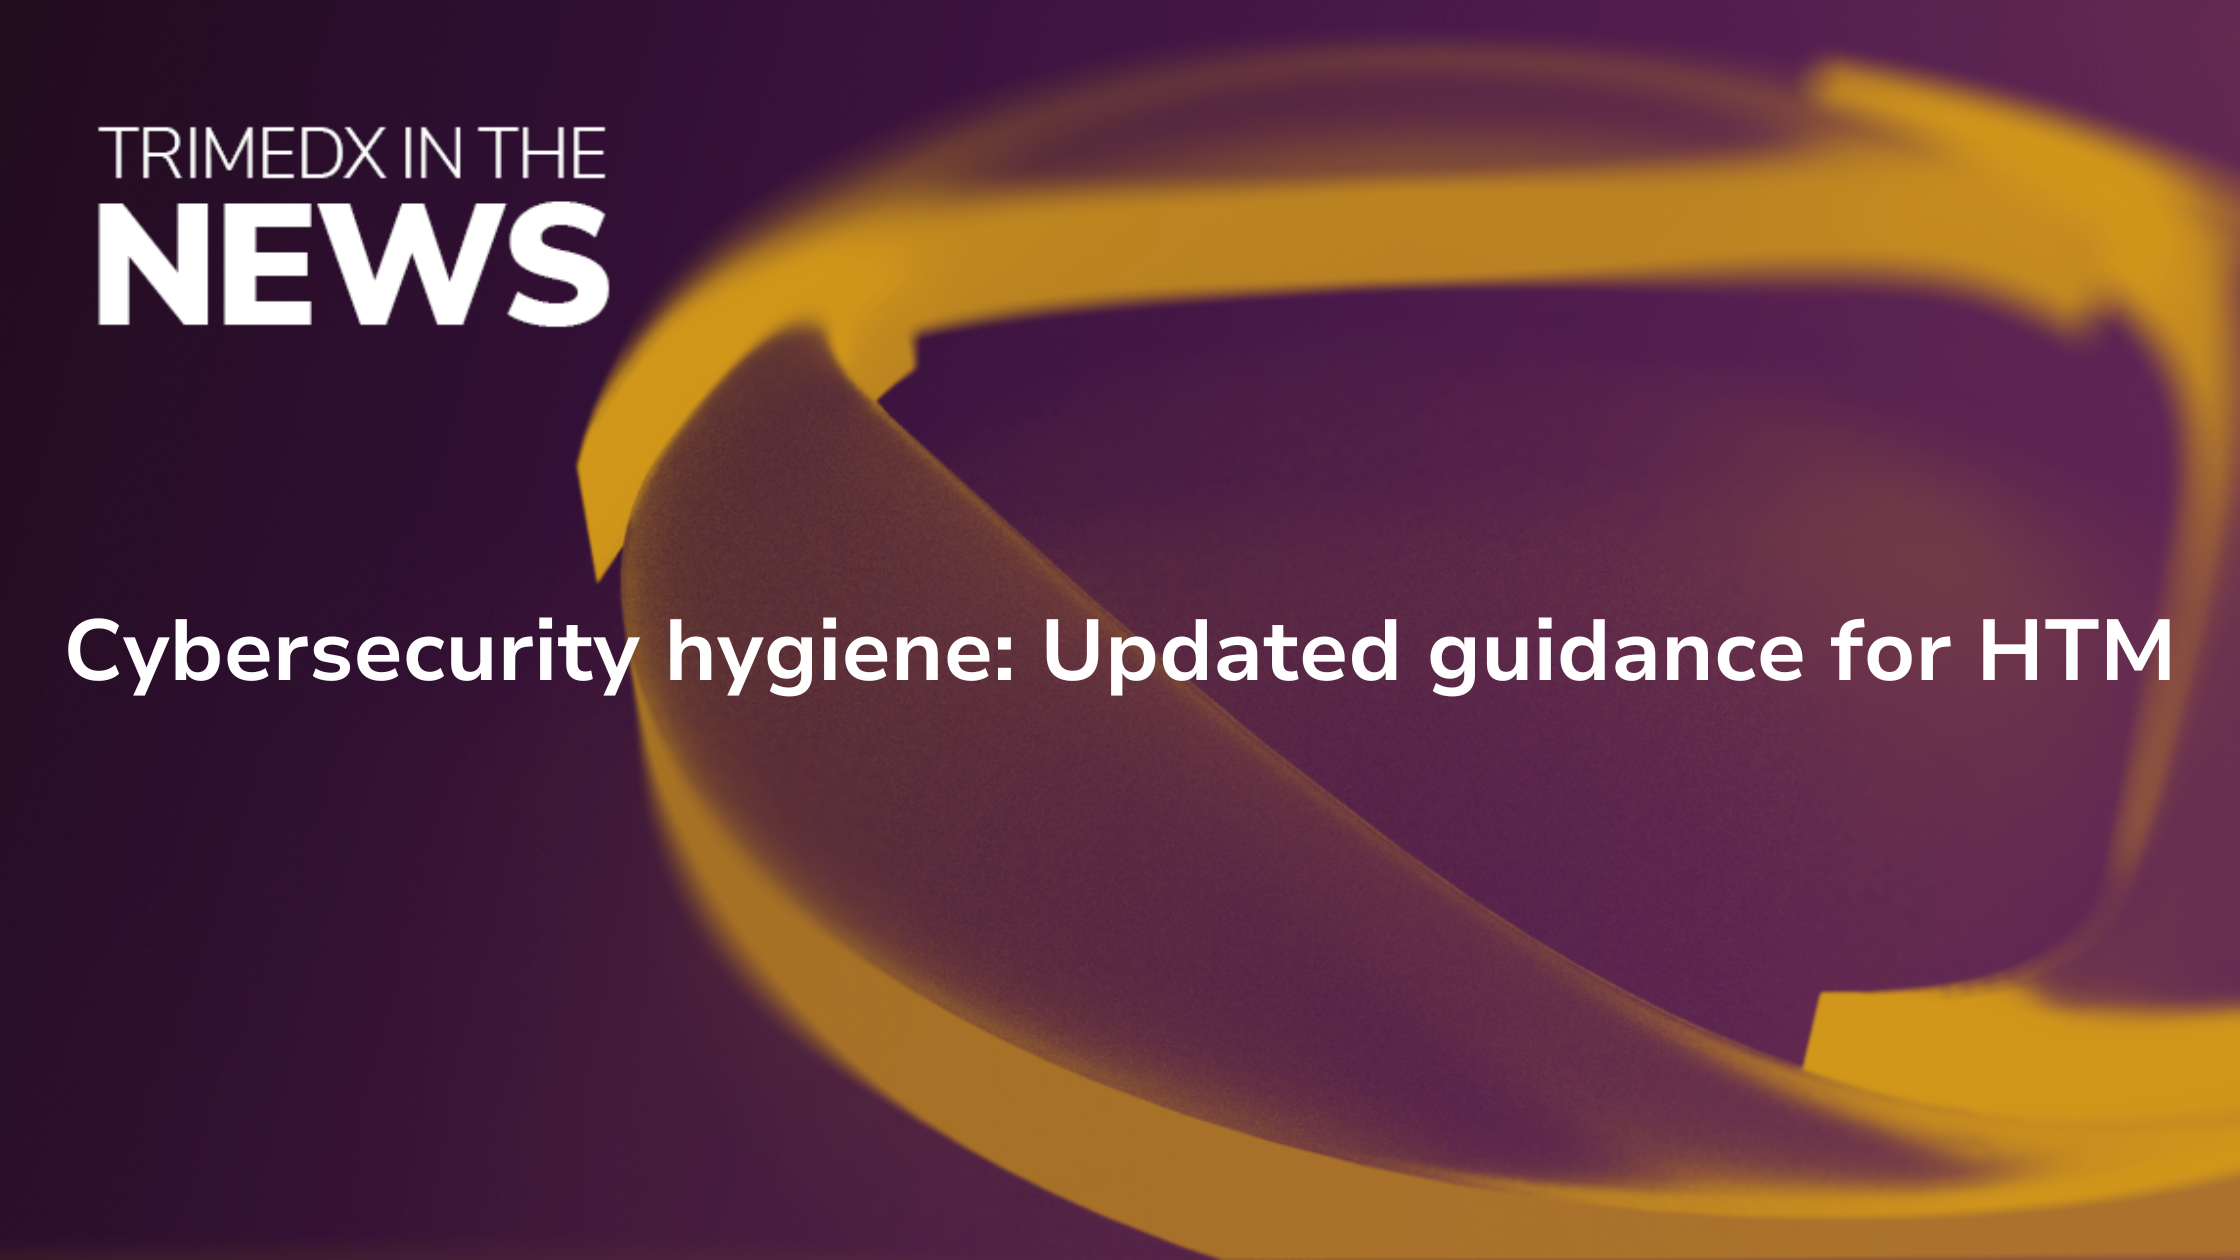 Cybersecurity hygiene: Updated guidance for HTM - TRIMEDX In the News